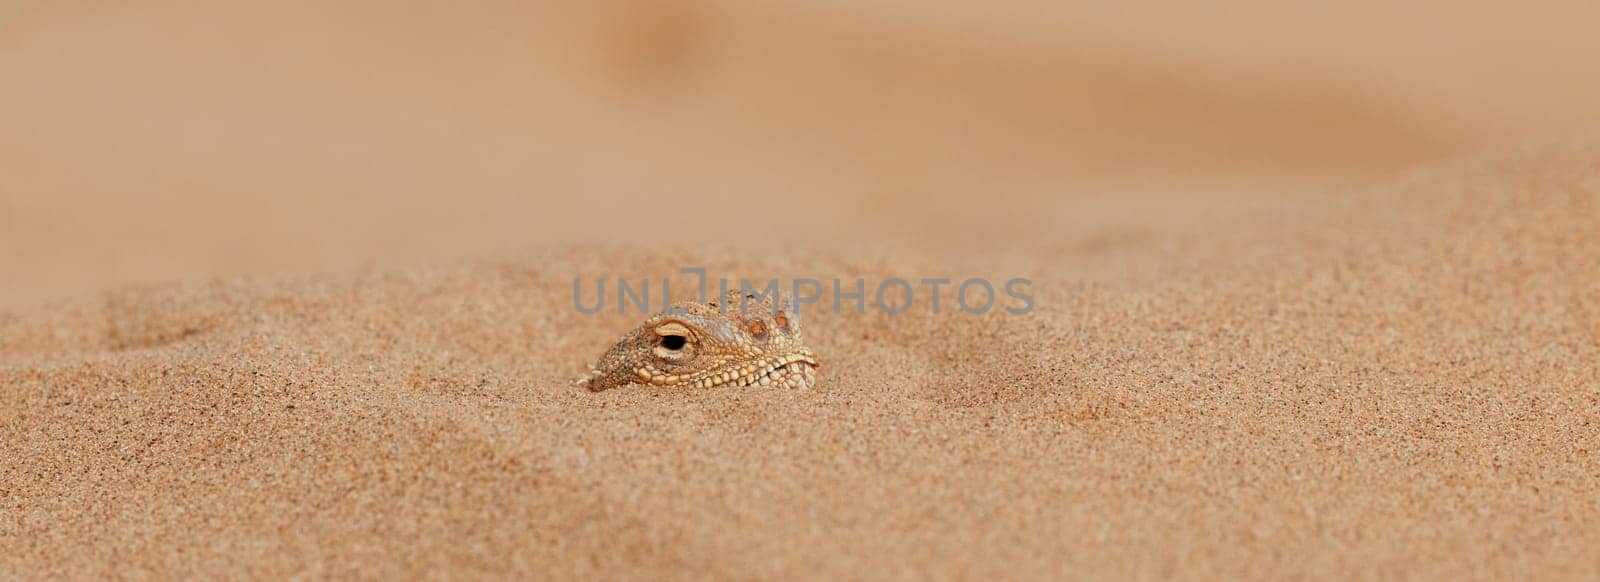 Toad-headed agama Phrynocephalus mystaceus, burrows into the sand in its natural environment. A living dragon of the desert Close up. incredible desert lizard by EvgeniyQW